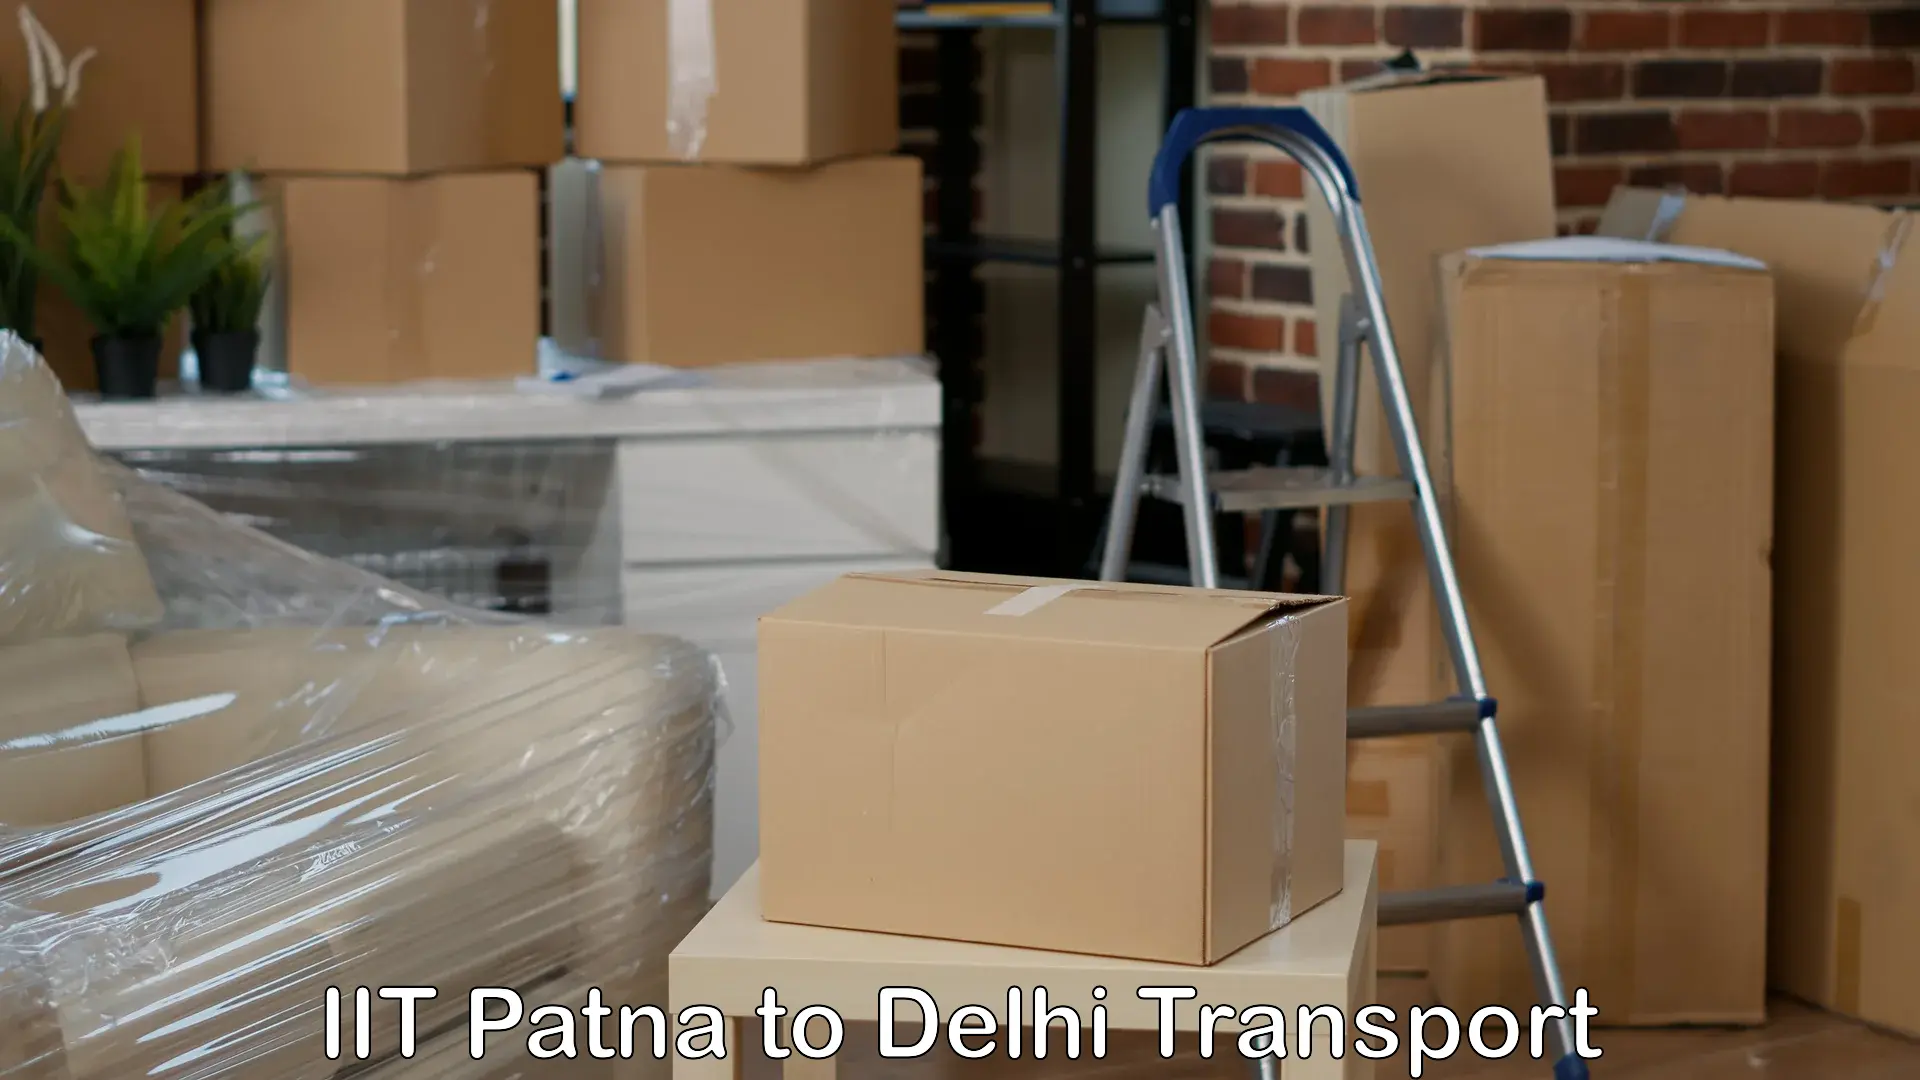 Transport bike from one state to another IIT Patna to Jamia Millia Islamia New Delhi